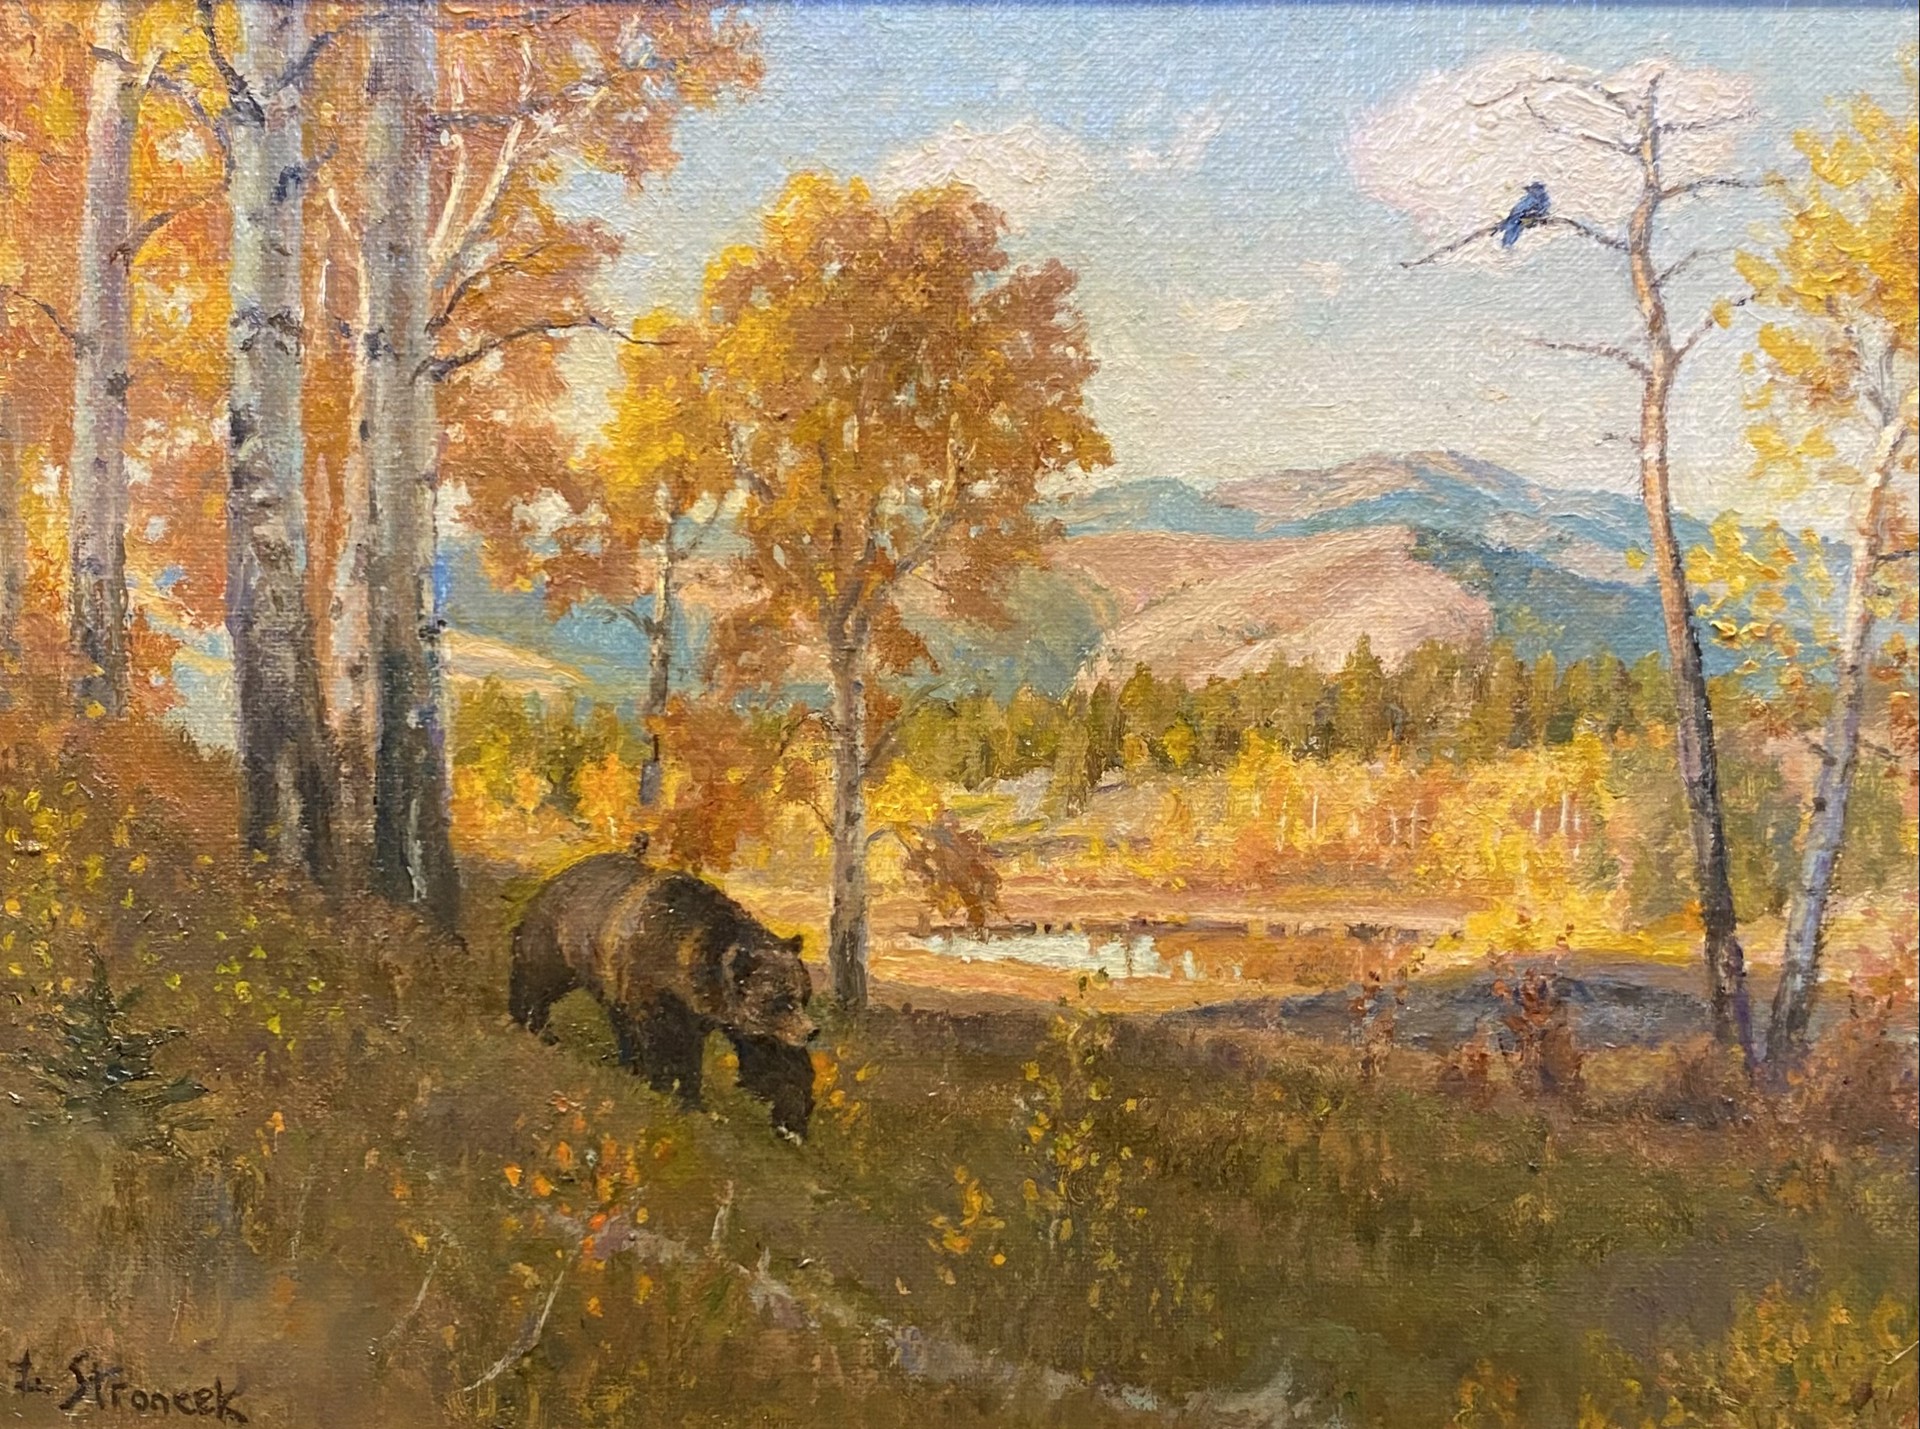 AUTUMN MORNING, GRIZZLY MEADOWS by Lee Stroncek